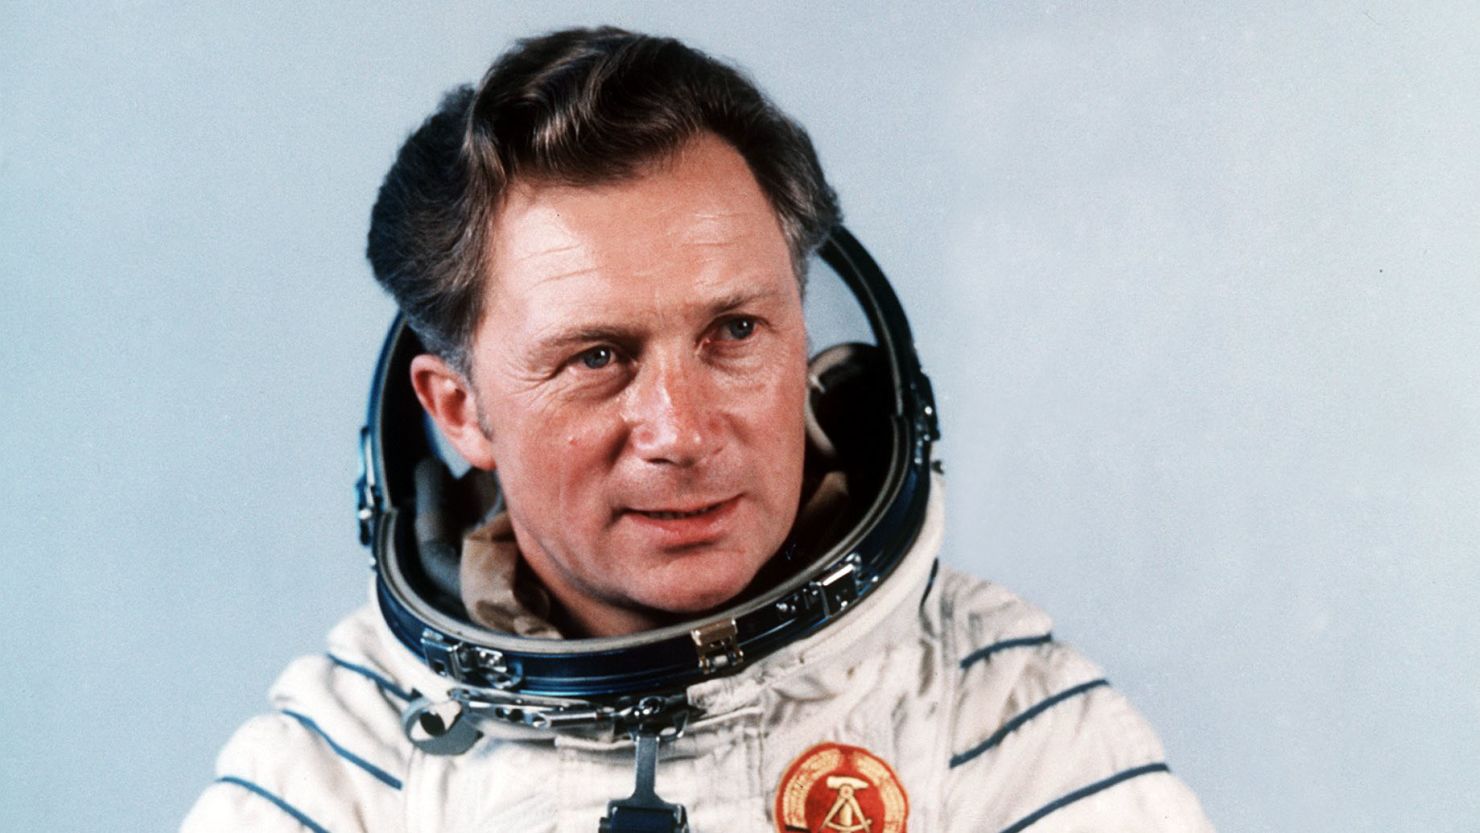 Sigmund Jähn, who has died aged 82,  poses after his successful flight with the Soviet spaceship Soyuz 31 in 1978.